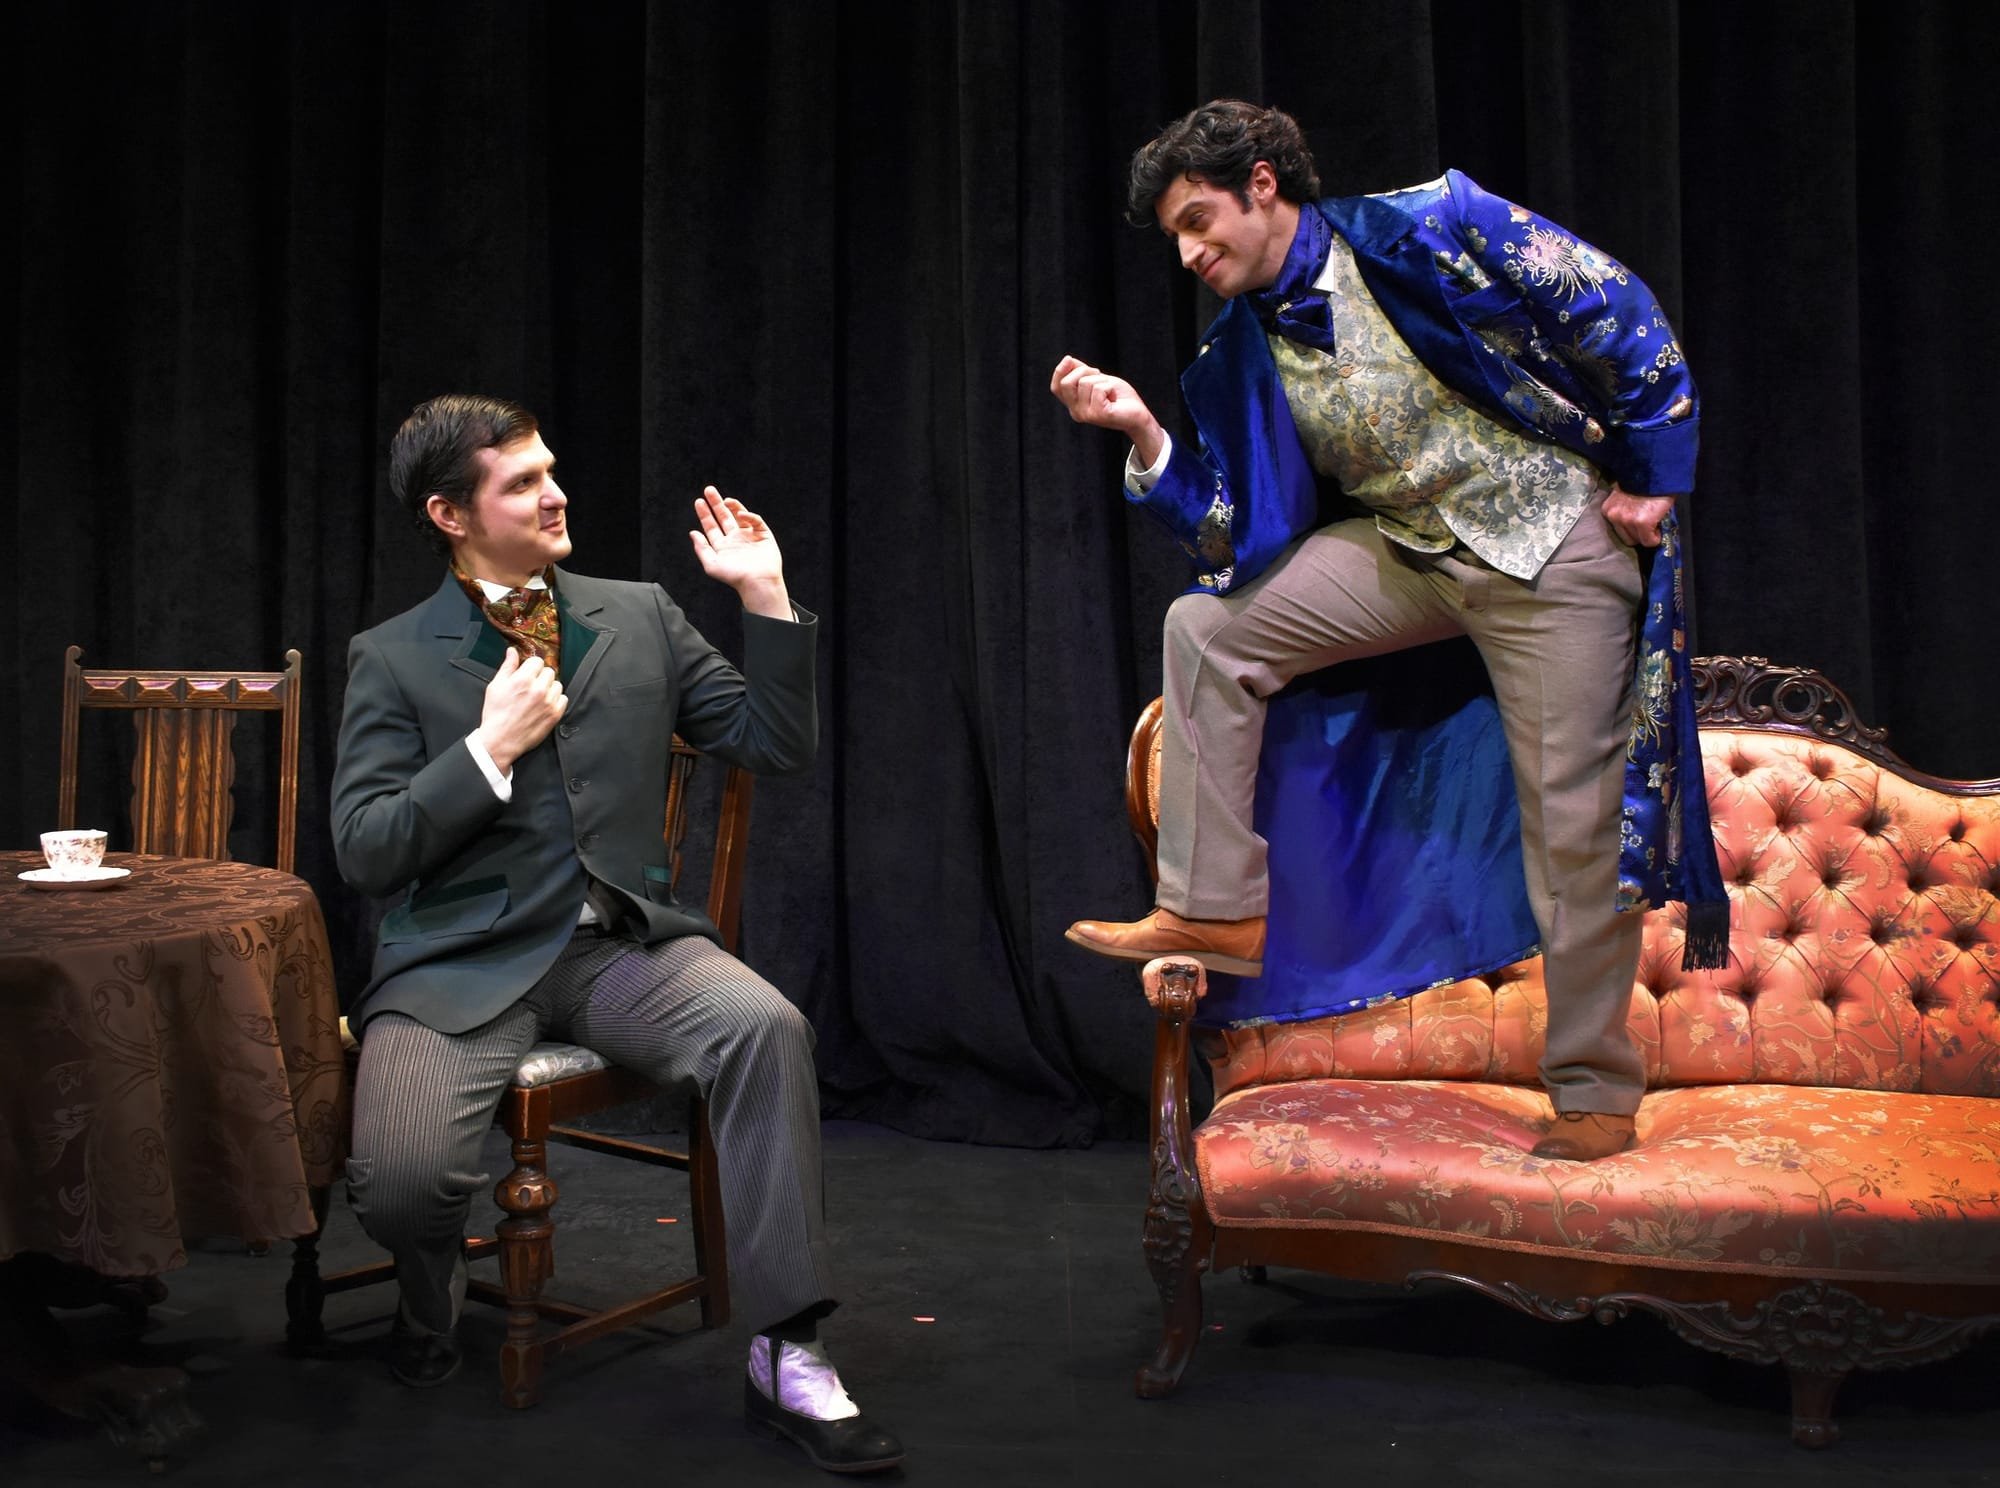 "The Importance of Being Earnest" - by Oscar Wilde - Majestic Theater (West Springfield, MA.) - REVIEW